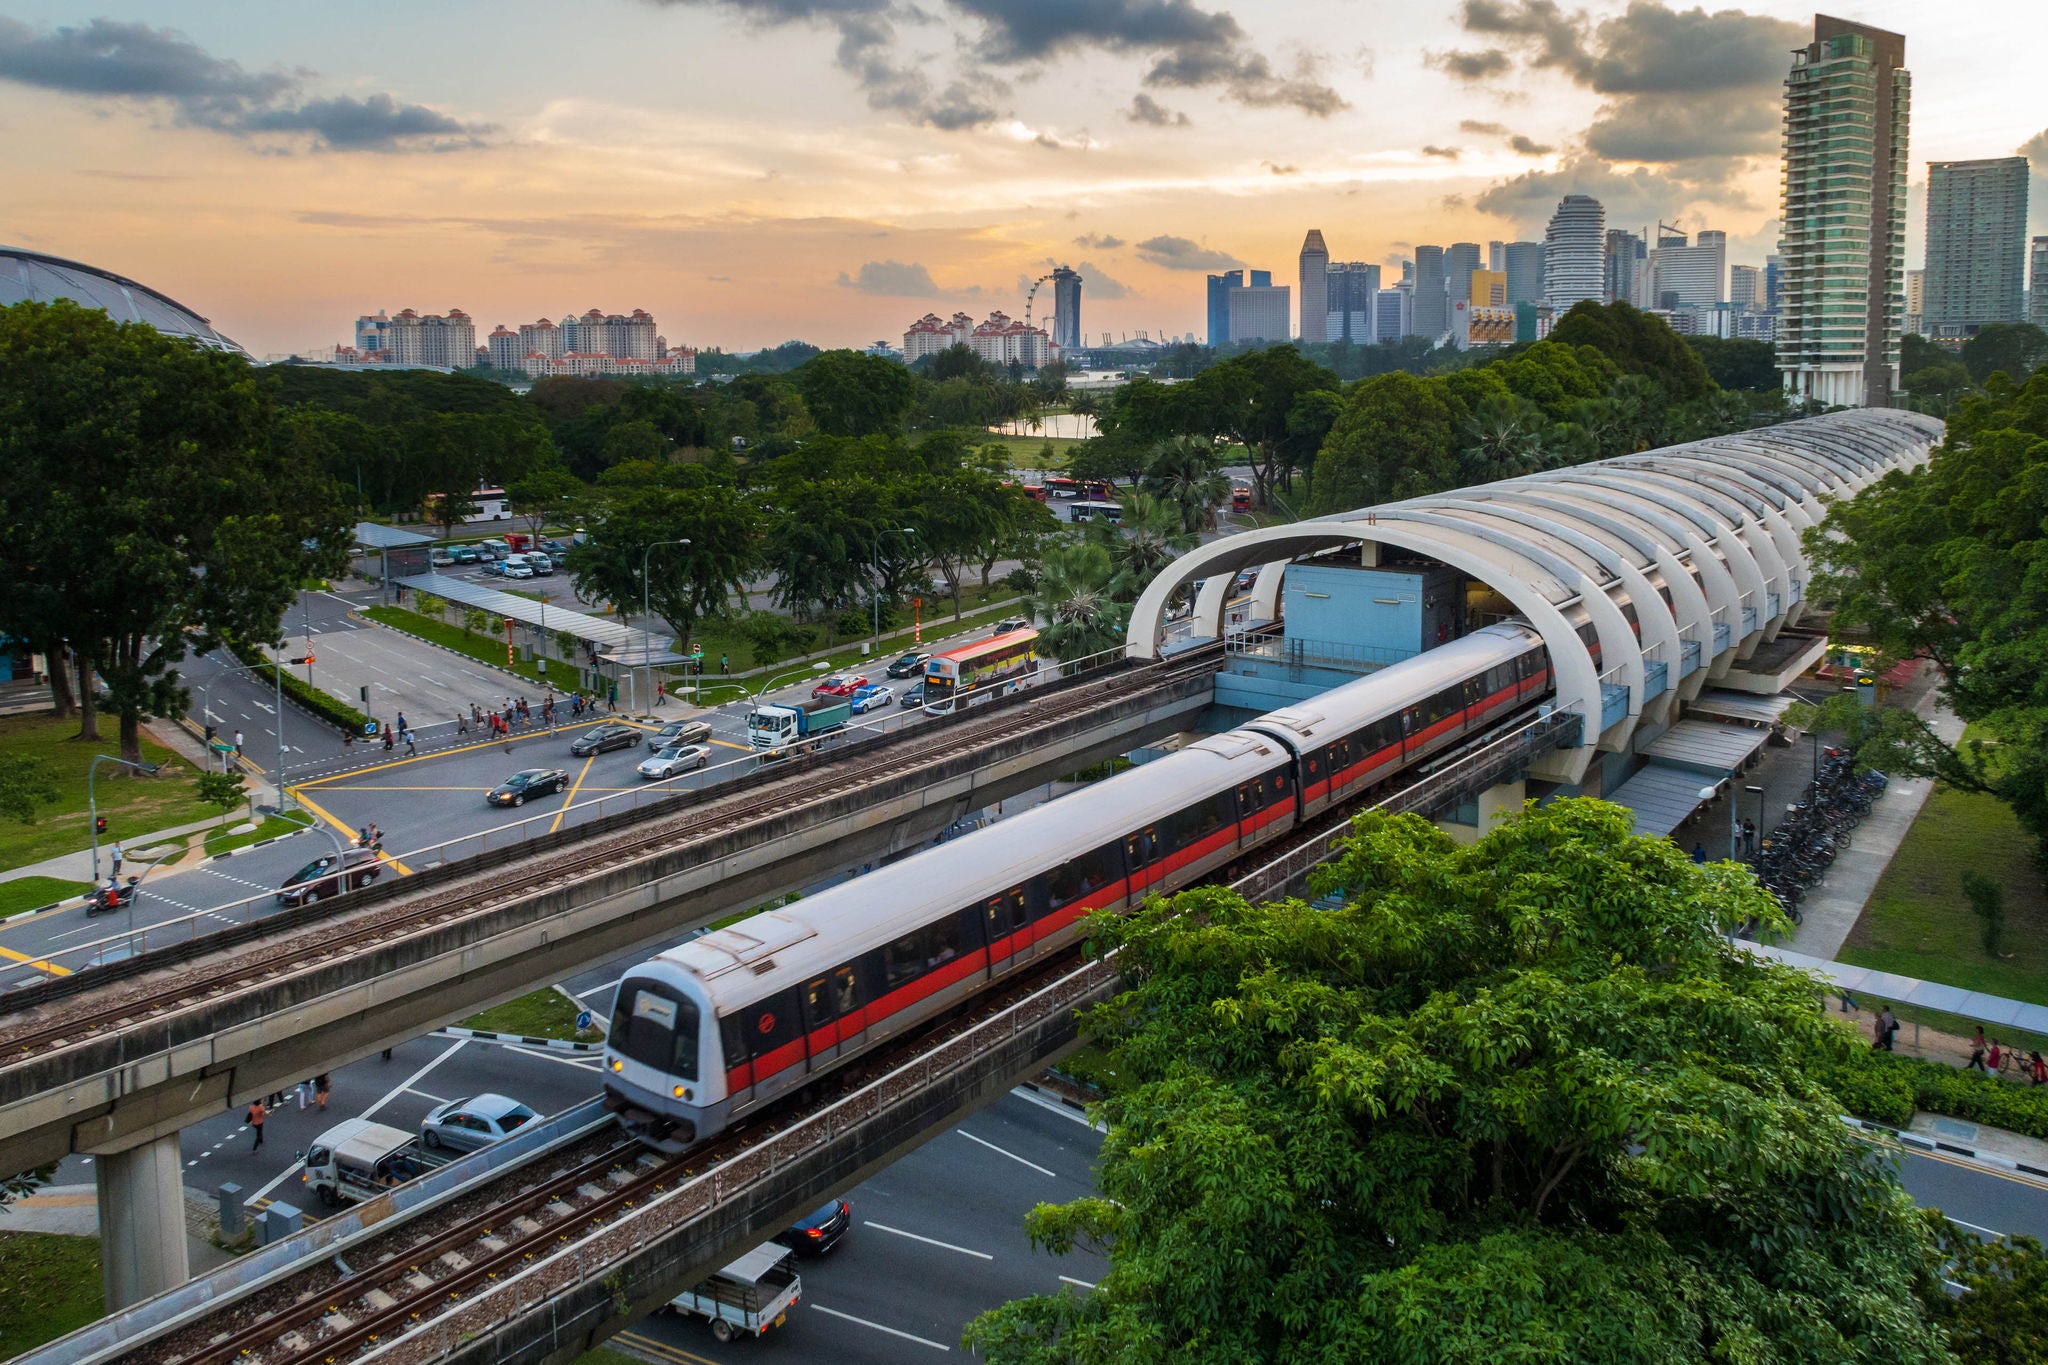 A high view point of Singapore mass rapid transit  (MRT) transportation train service in central Kallang station during sunset with Singapore city skyline in background. Singapore MRT train system serves as one of Singapore daily transportation for most commuters. Background include Singapore downtown city skyline with modern skyscrapers and commercial buildings such as Marina Bay Sands and Singapore flyer